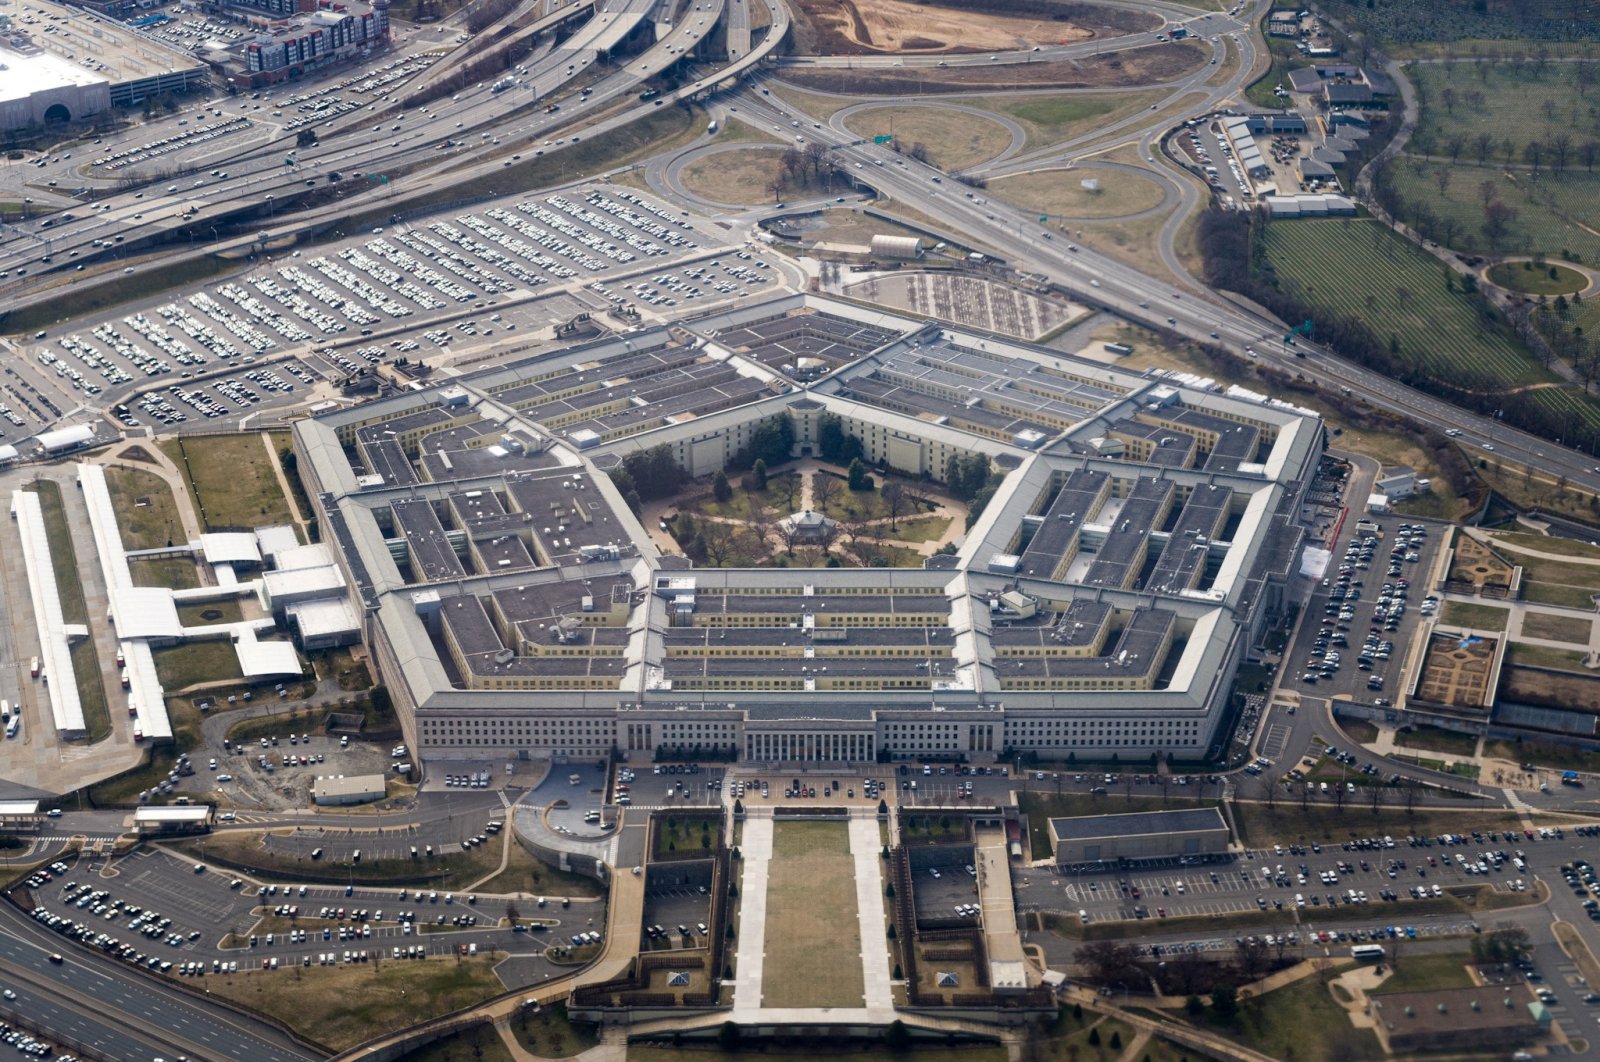 The Pentagon is seen from the air in Washington, U.S., March 3, 2022. (Reuters Photo)